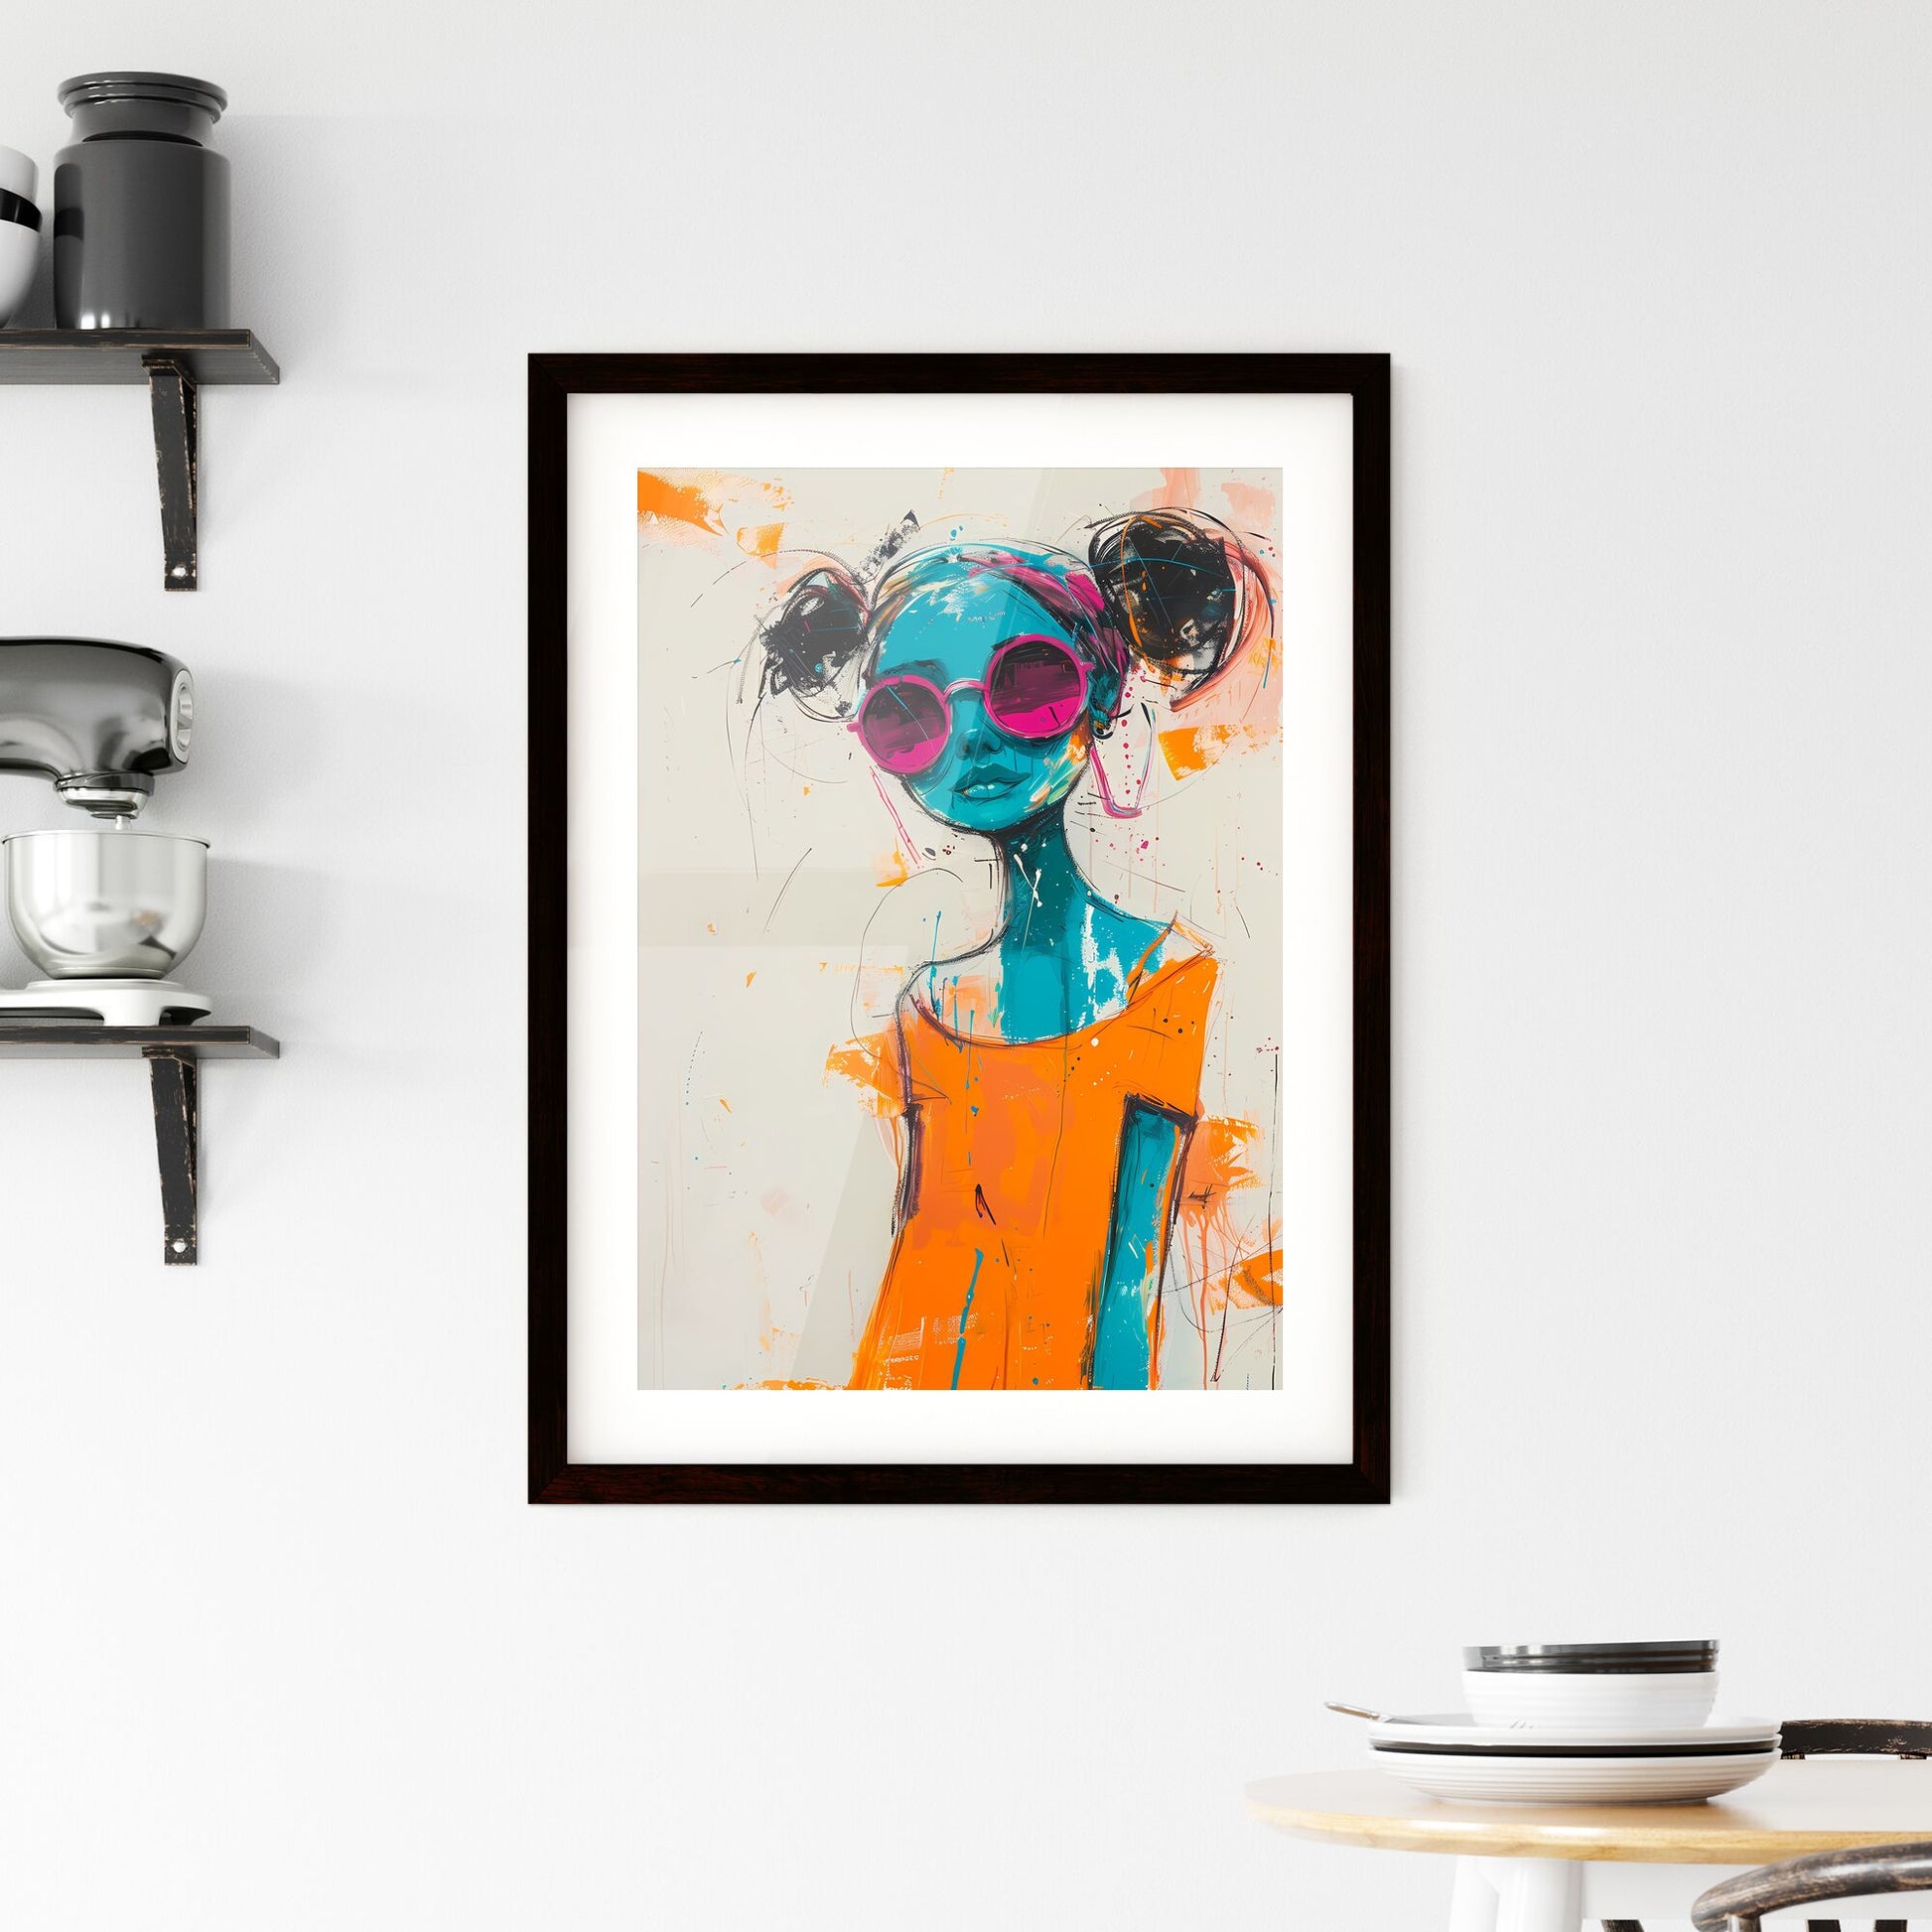 Abstract Pastel Hues Expressionism - Whimsical Colorful Painting of Woman in Pink Sunglasses Default Title